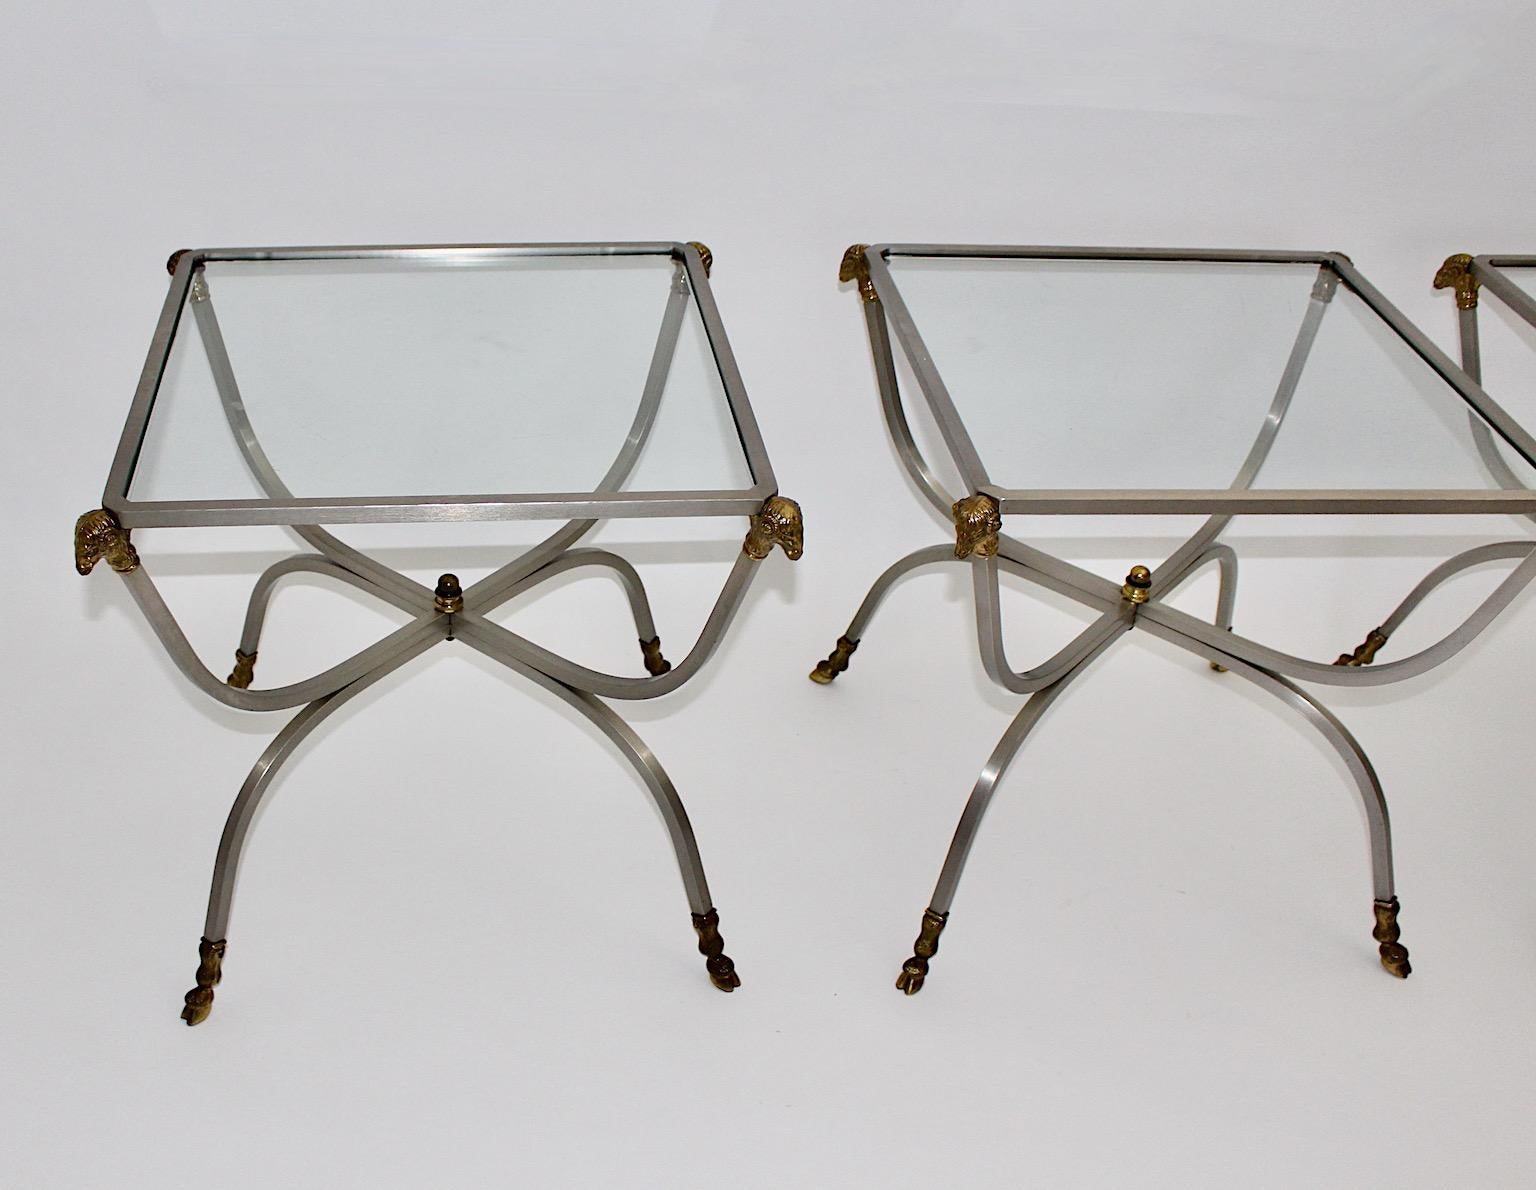 Hollywood Regency Modern Vintage Three Coffee Tables Side Tables Sofa Tables Maison Jansen 1970s For Sale